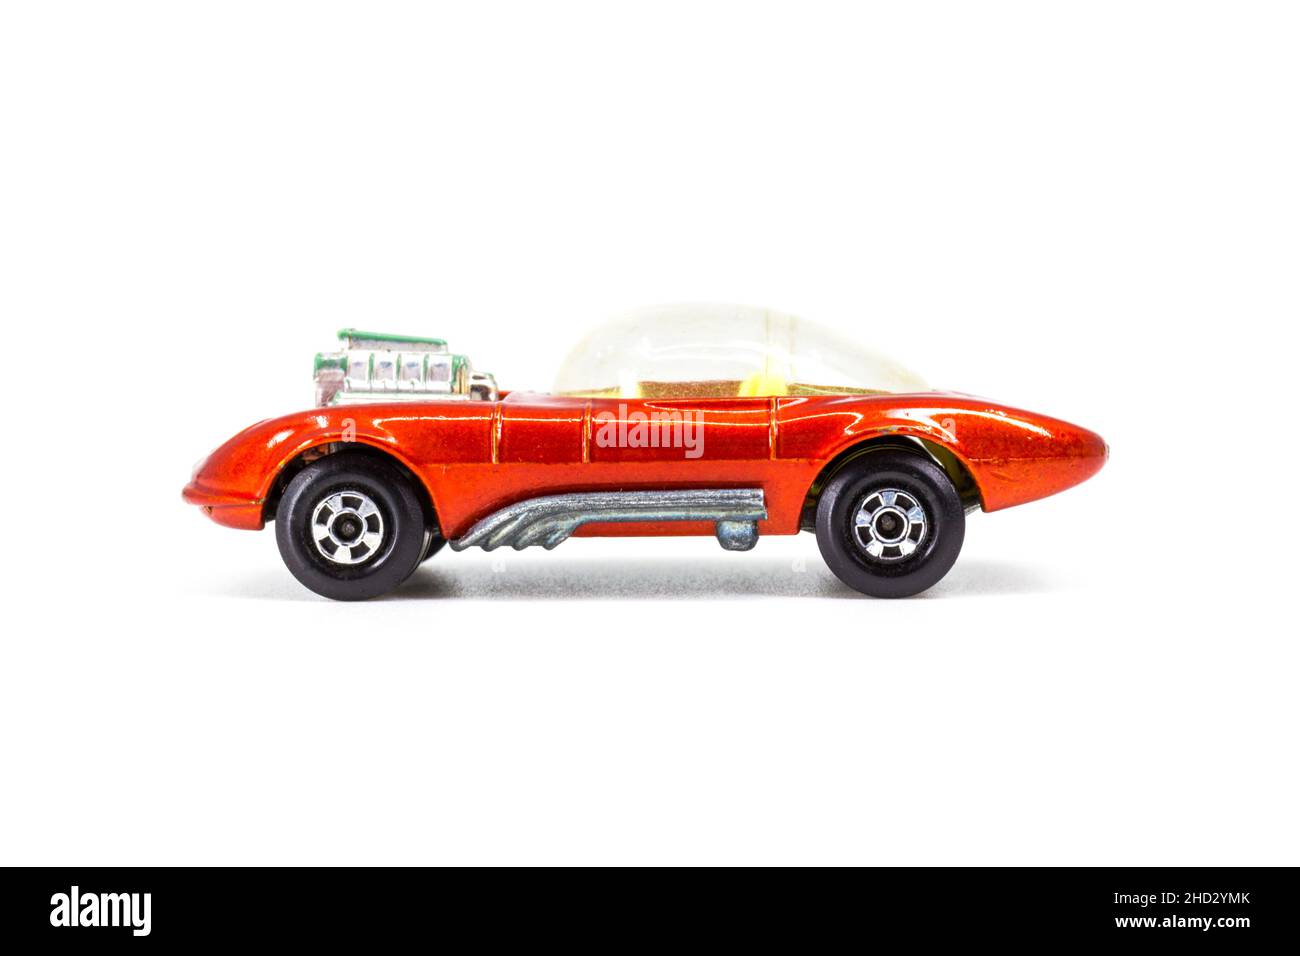 Lesney Products Matchbox model toy car 1-75 series no. 36 Draguar Stock Photo